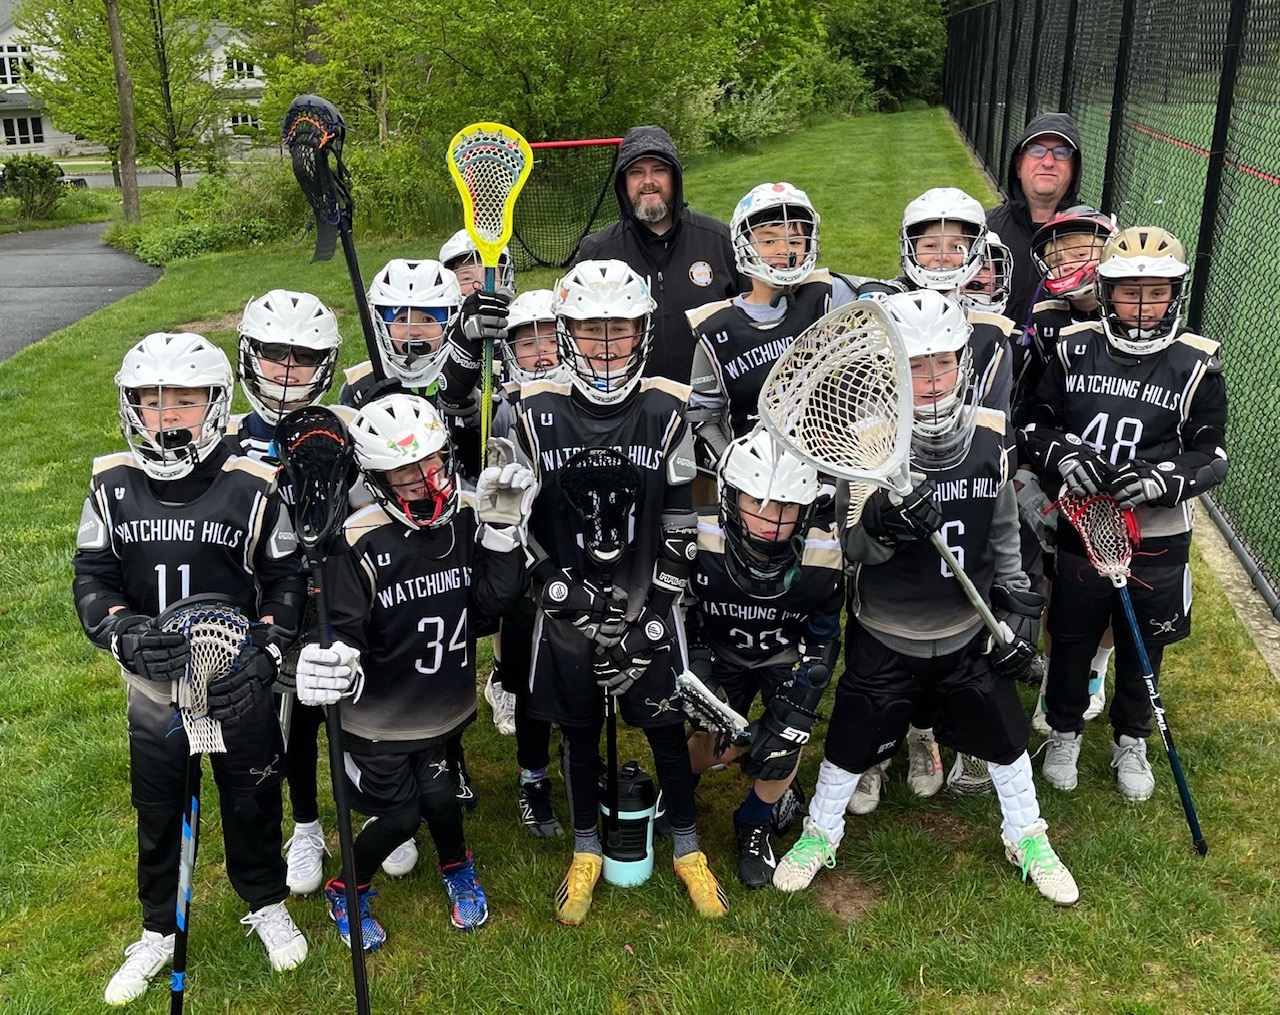 Watchung Hills Lacrosse Competes at Jersey Jam Tournament